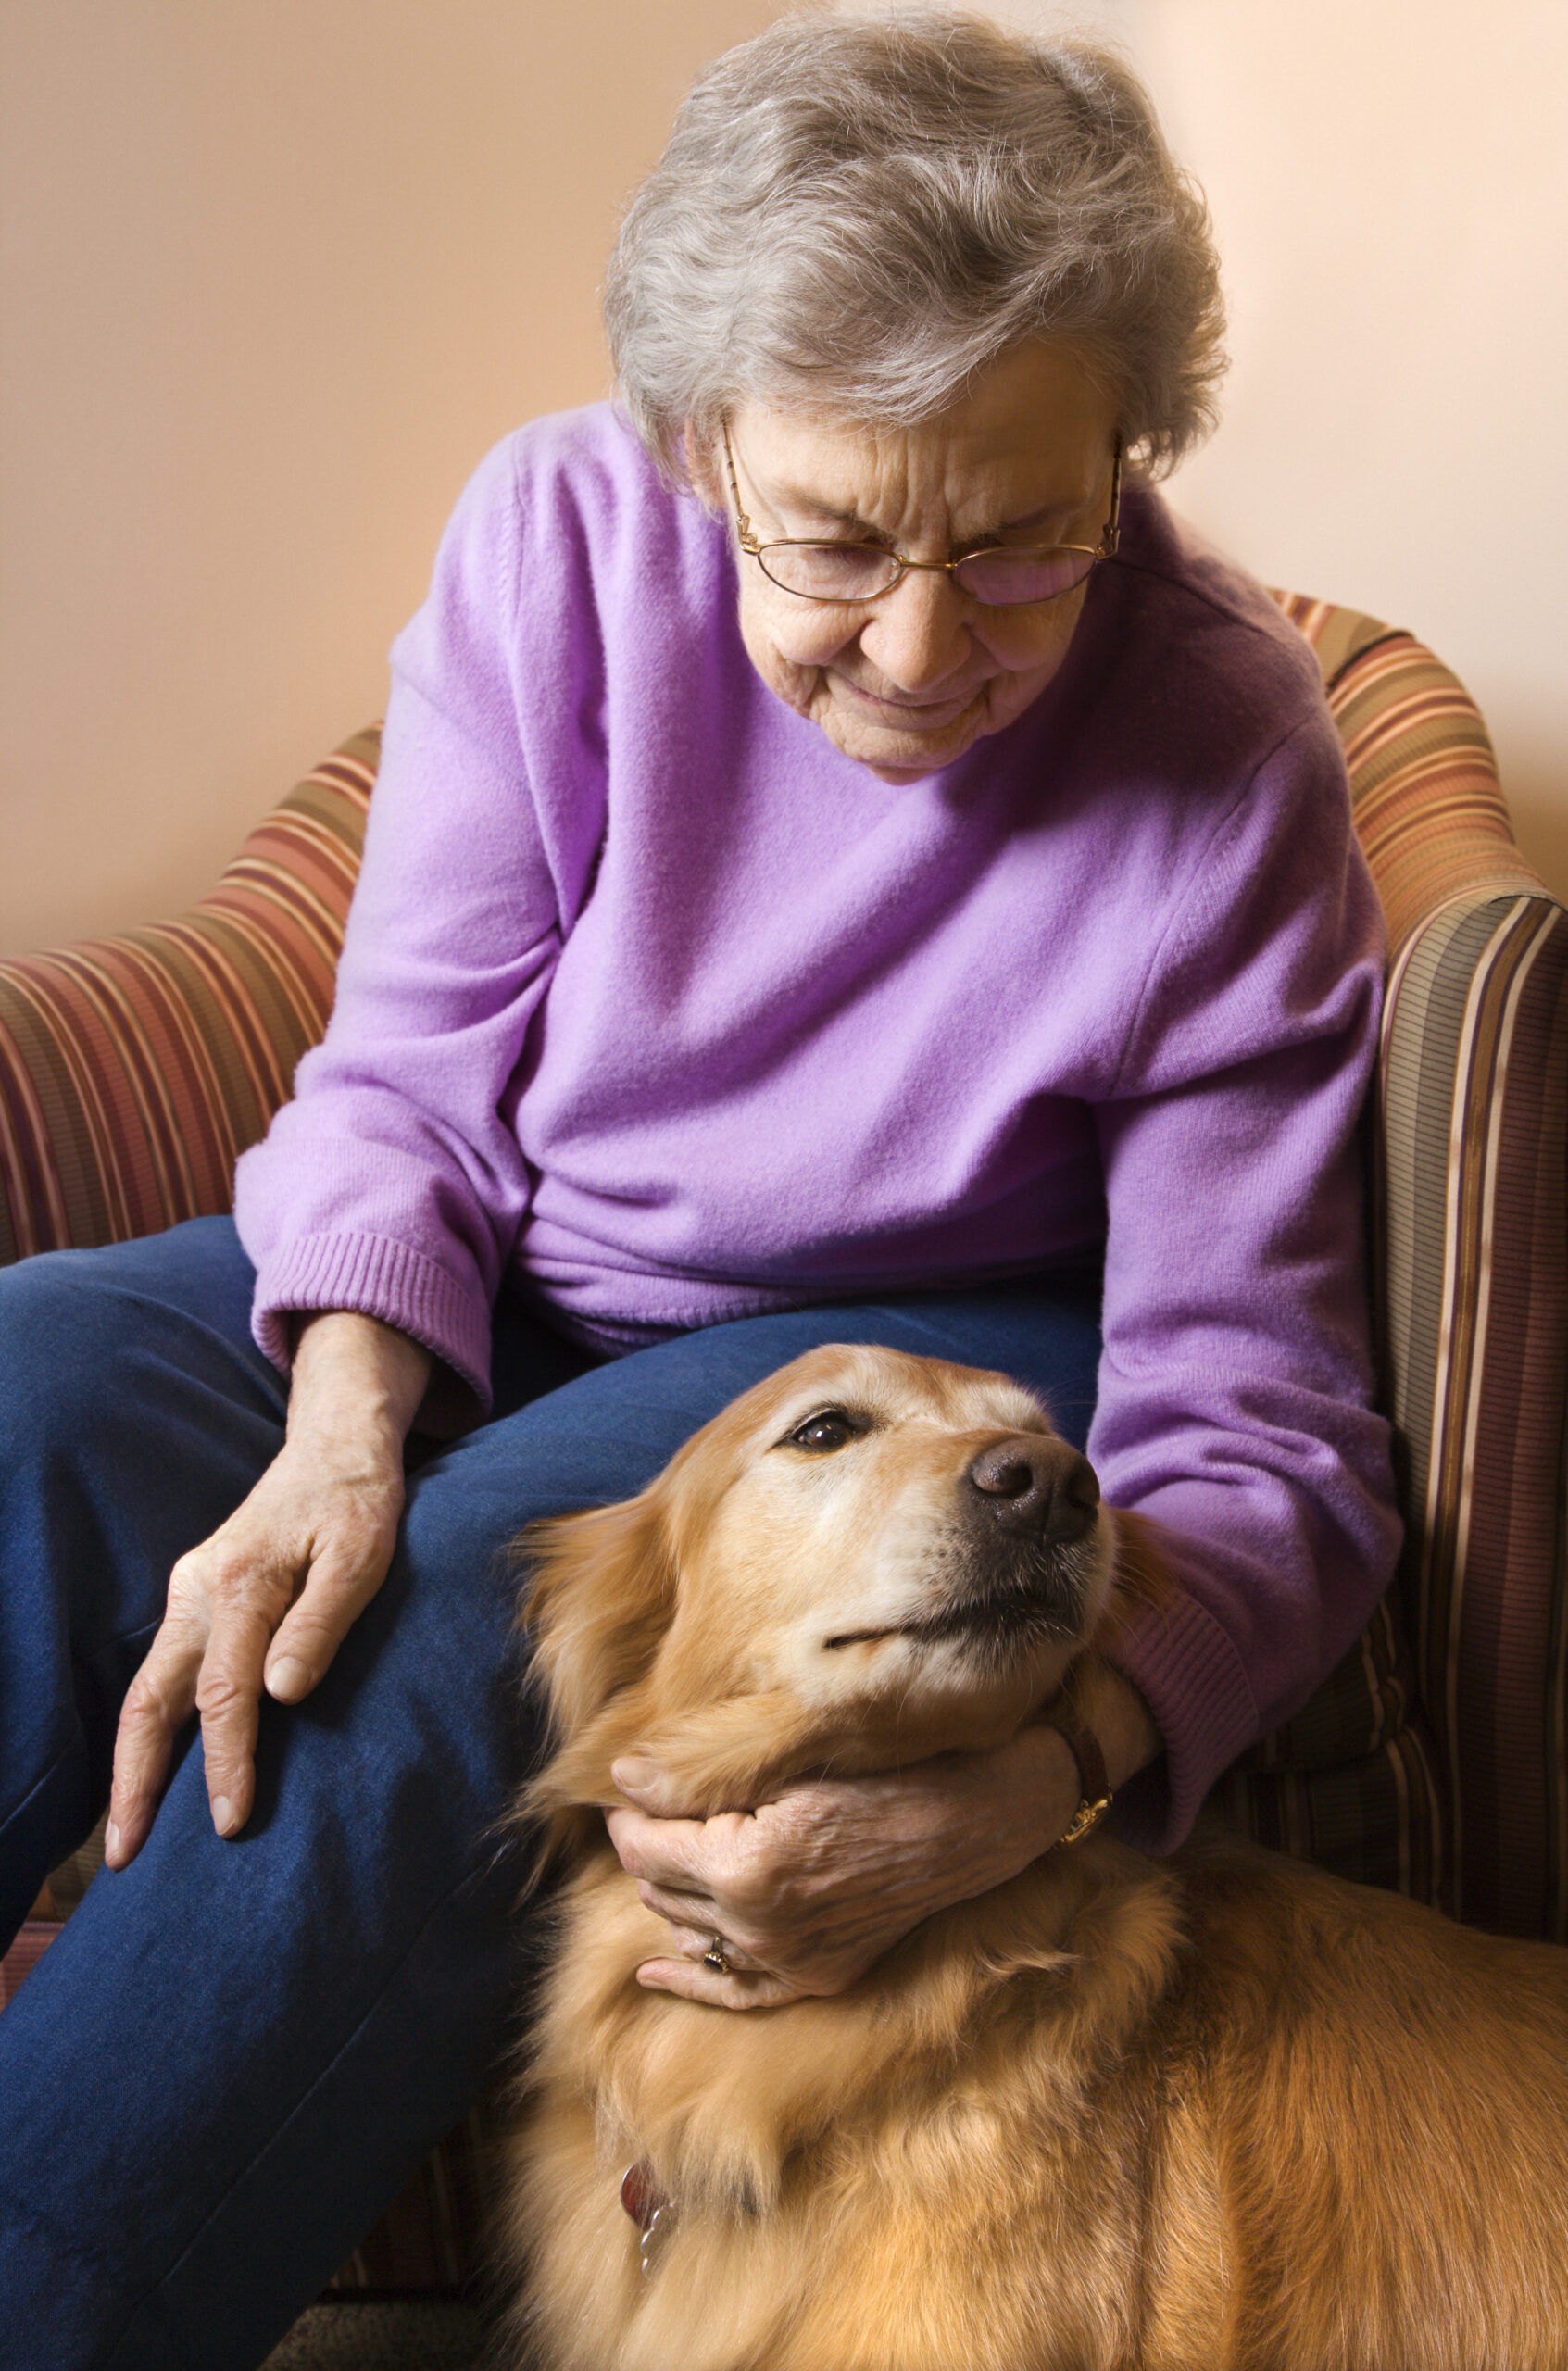 Elderly woman with her dog.